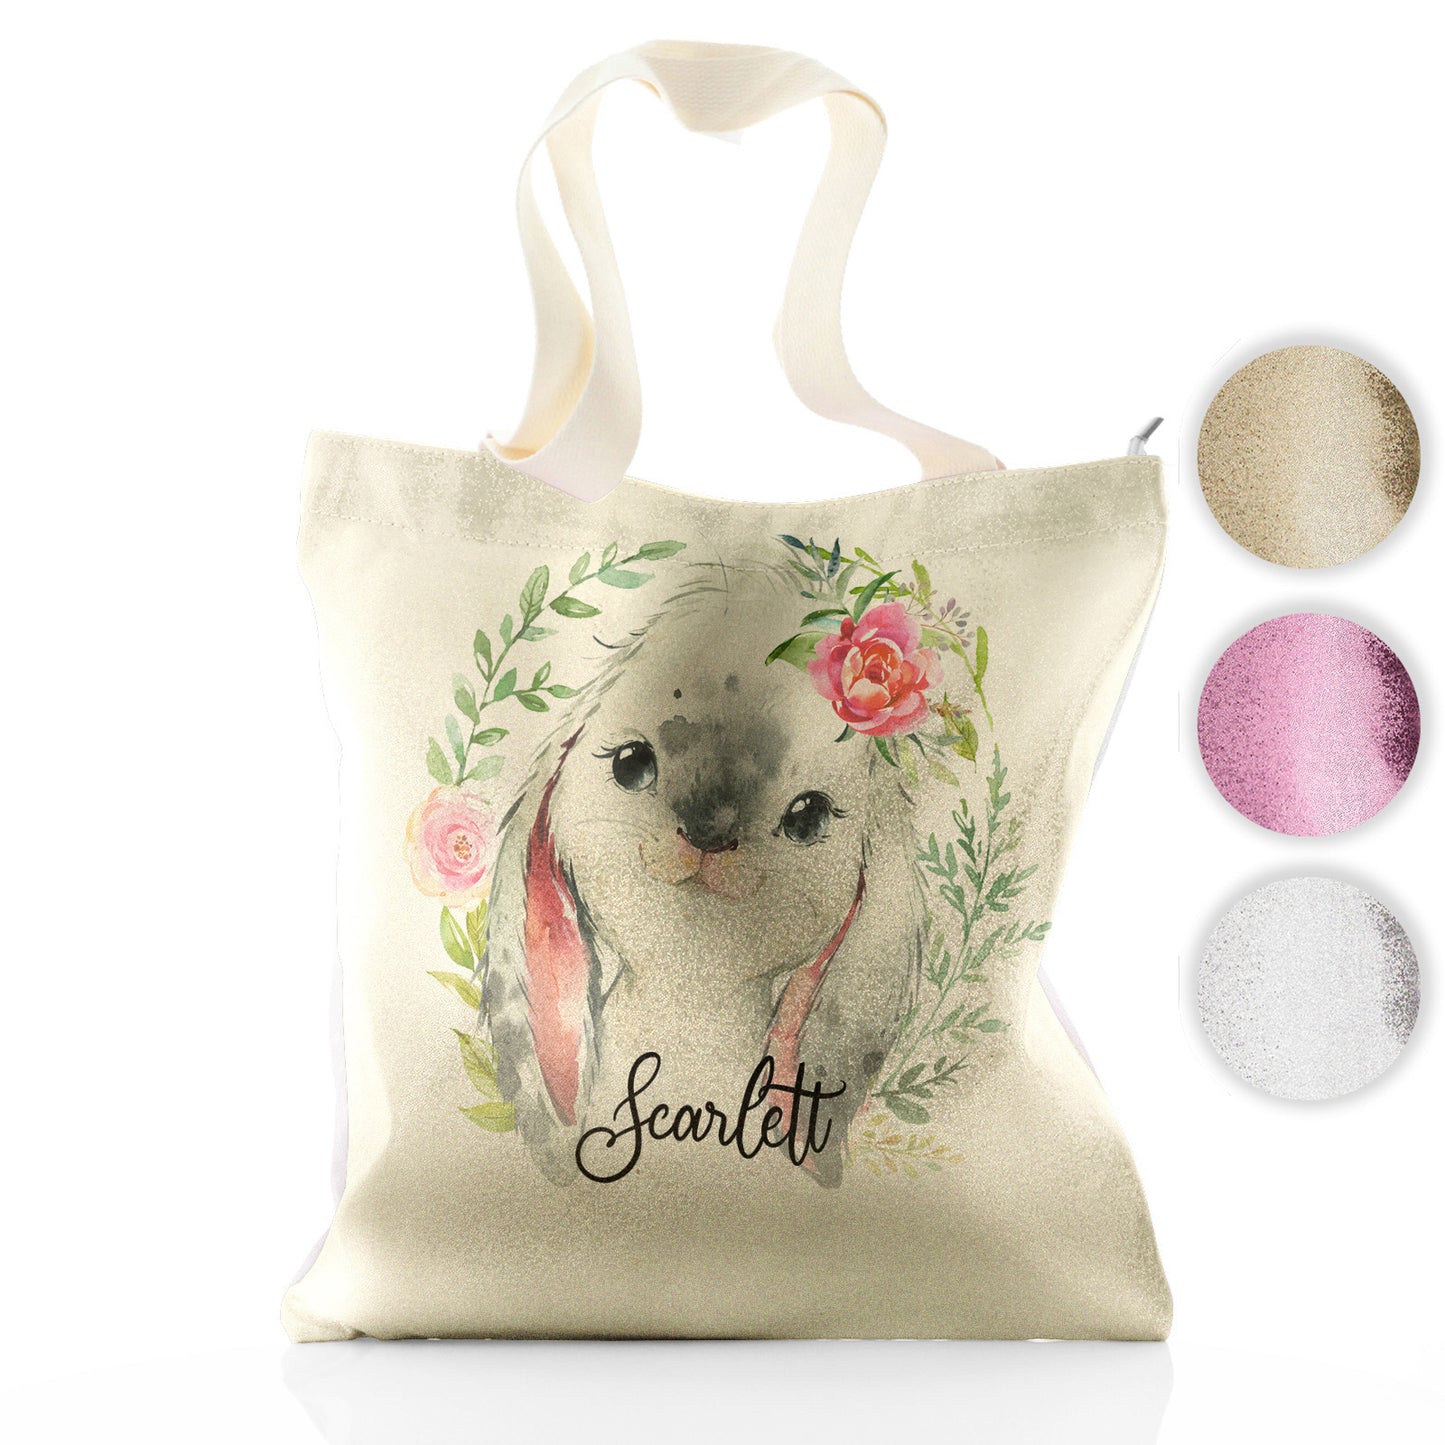 Personalised Glitter Tote Bag with Grey Rabbit Flower Wreath and Cute Text